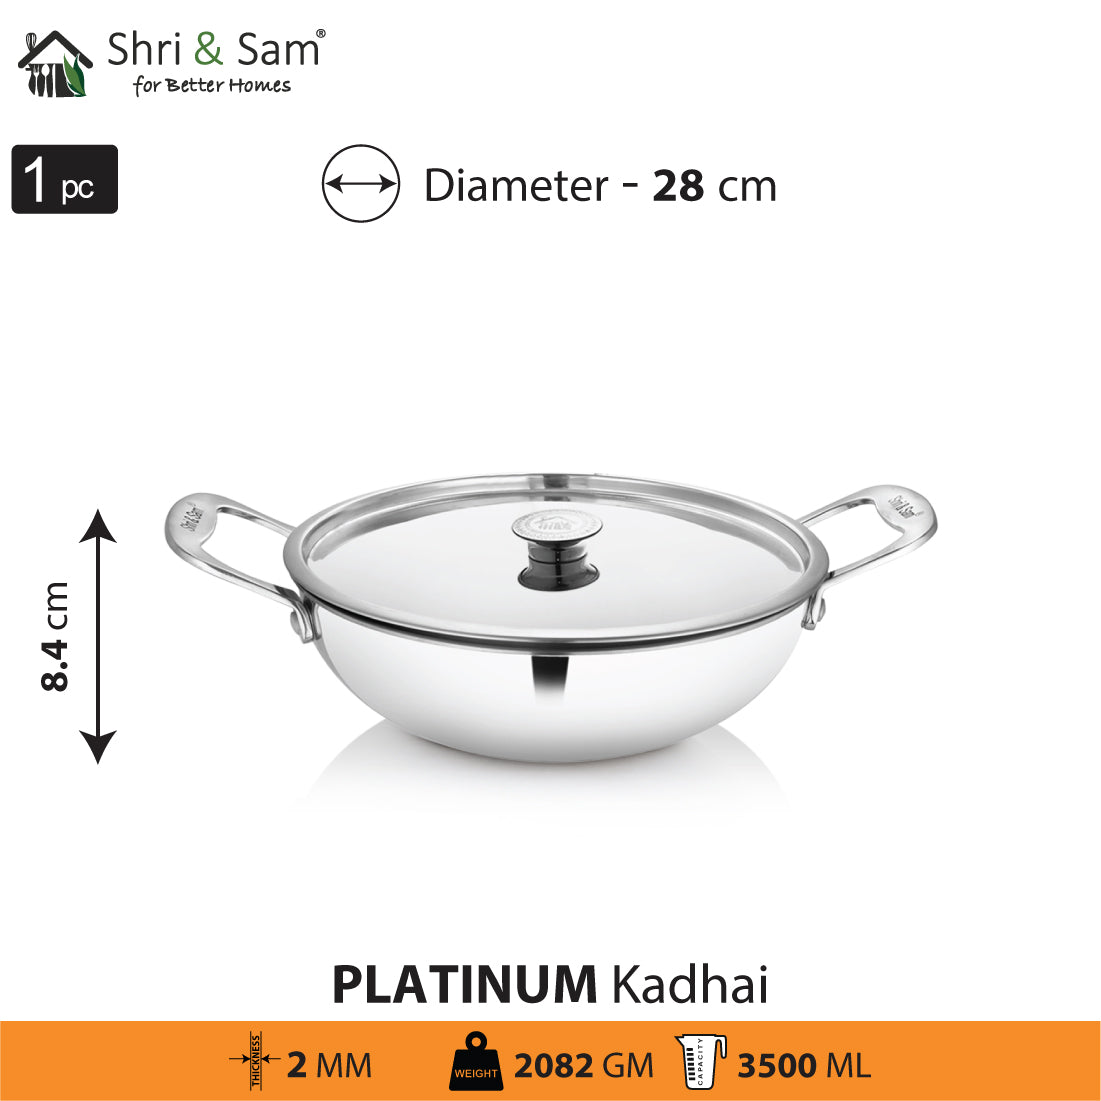 Stainless Steel Heavy Weight Kadhai with SS Lid Platinum